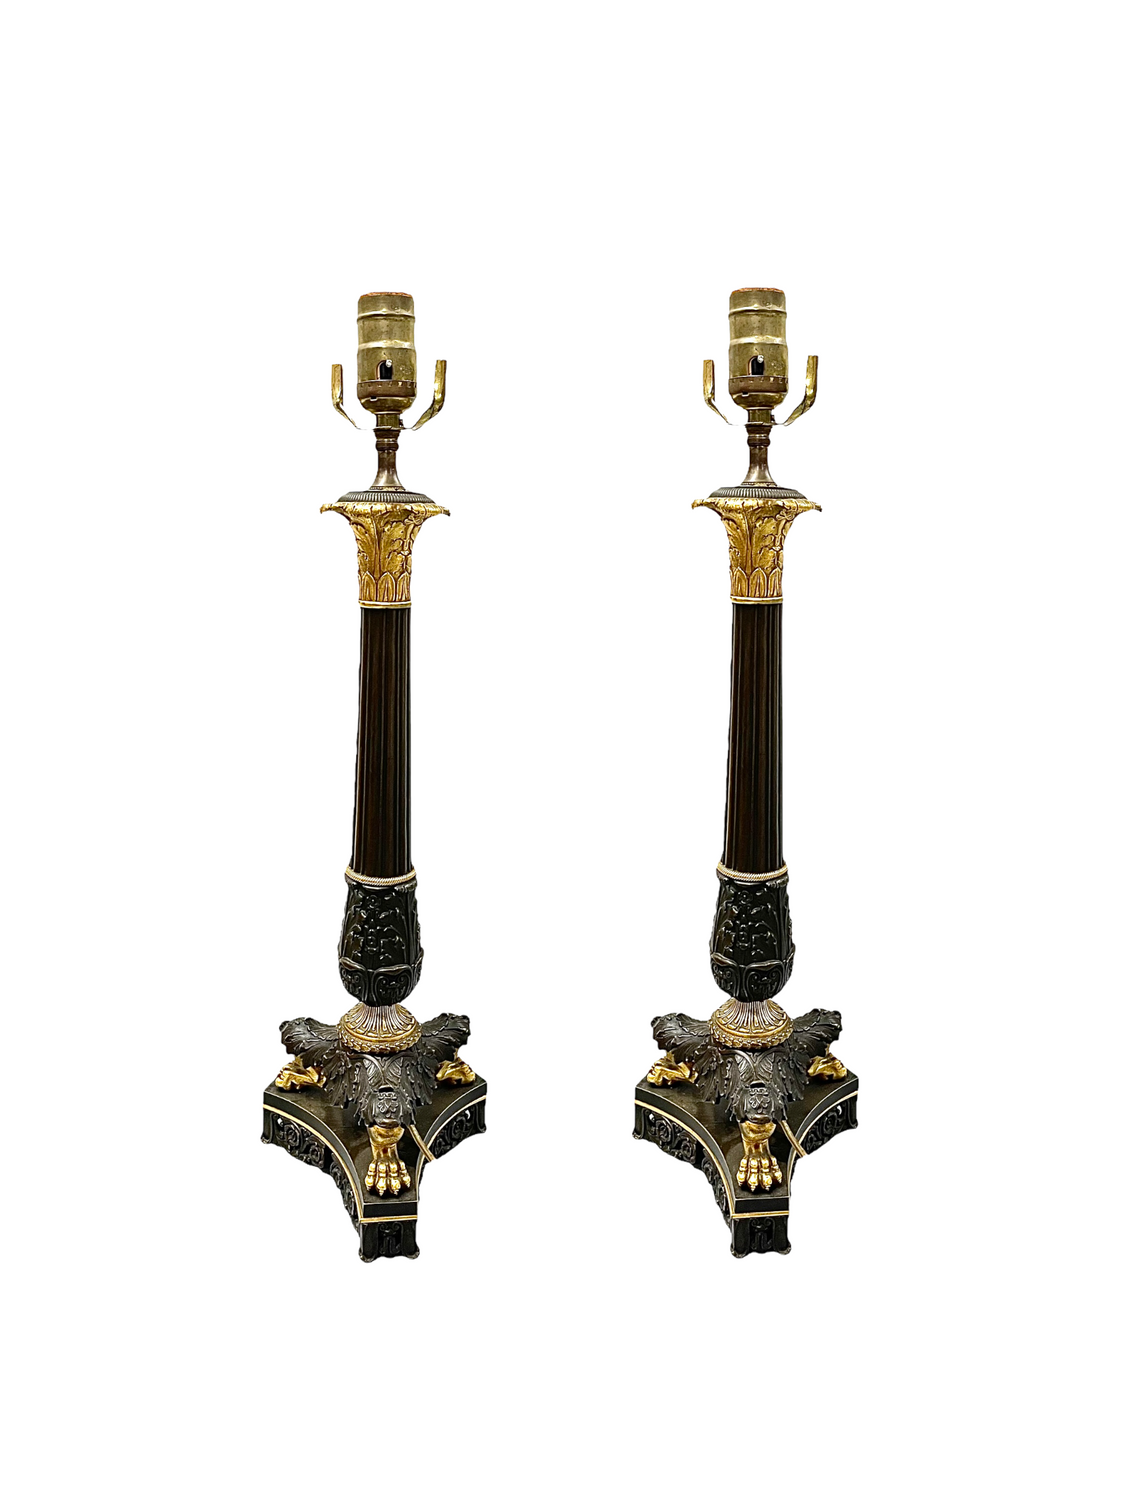 Empire Table Lamps in Black lacquer and Gold Leaf